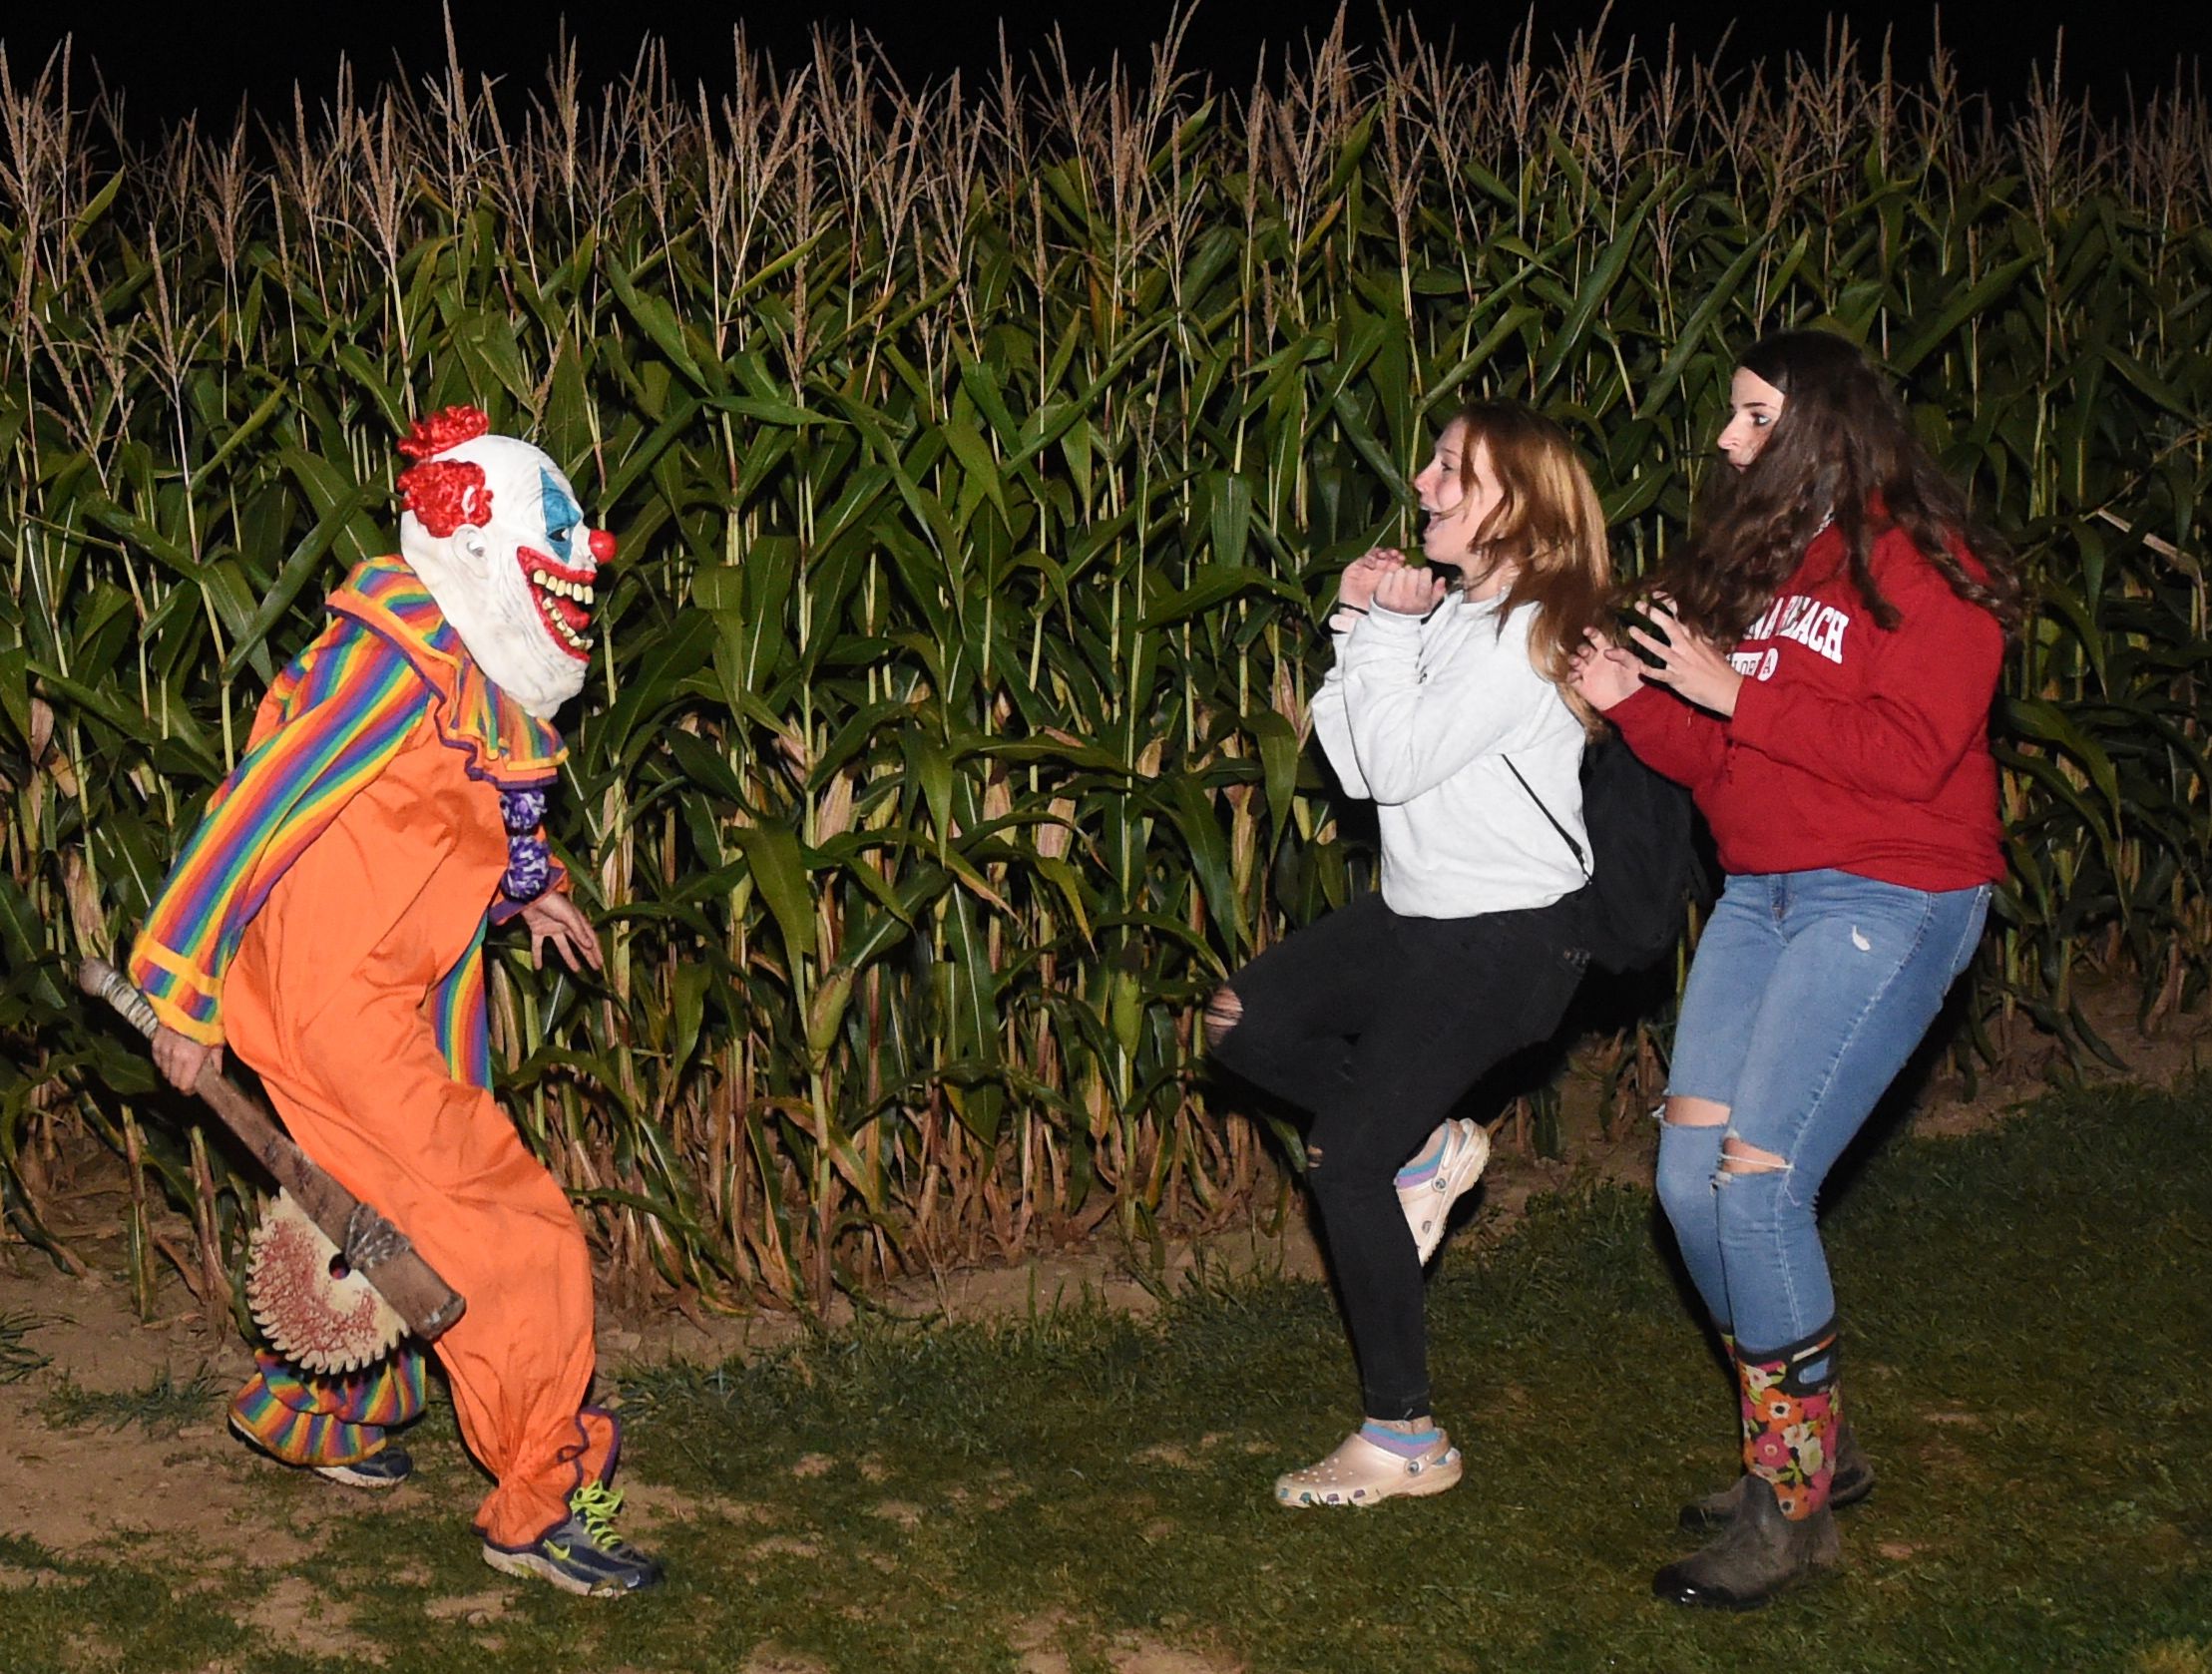 Haunted House, Haunted Houses, Halloween Attractions, Haunted Hayrides